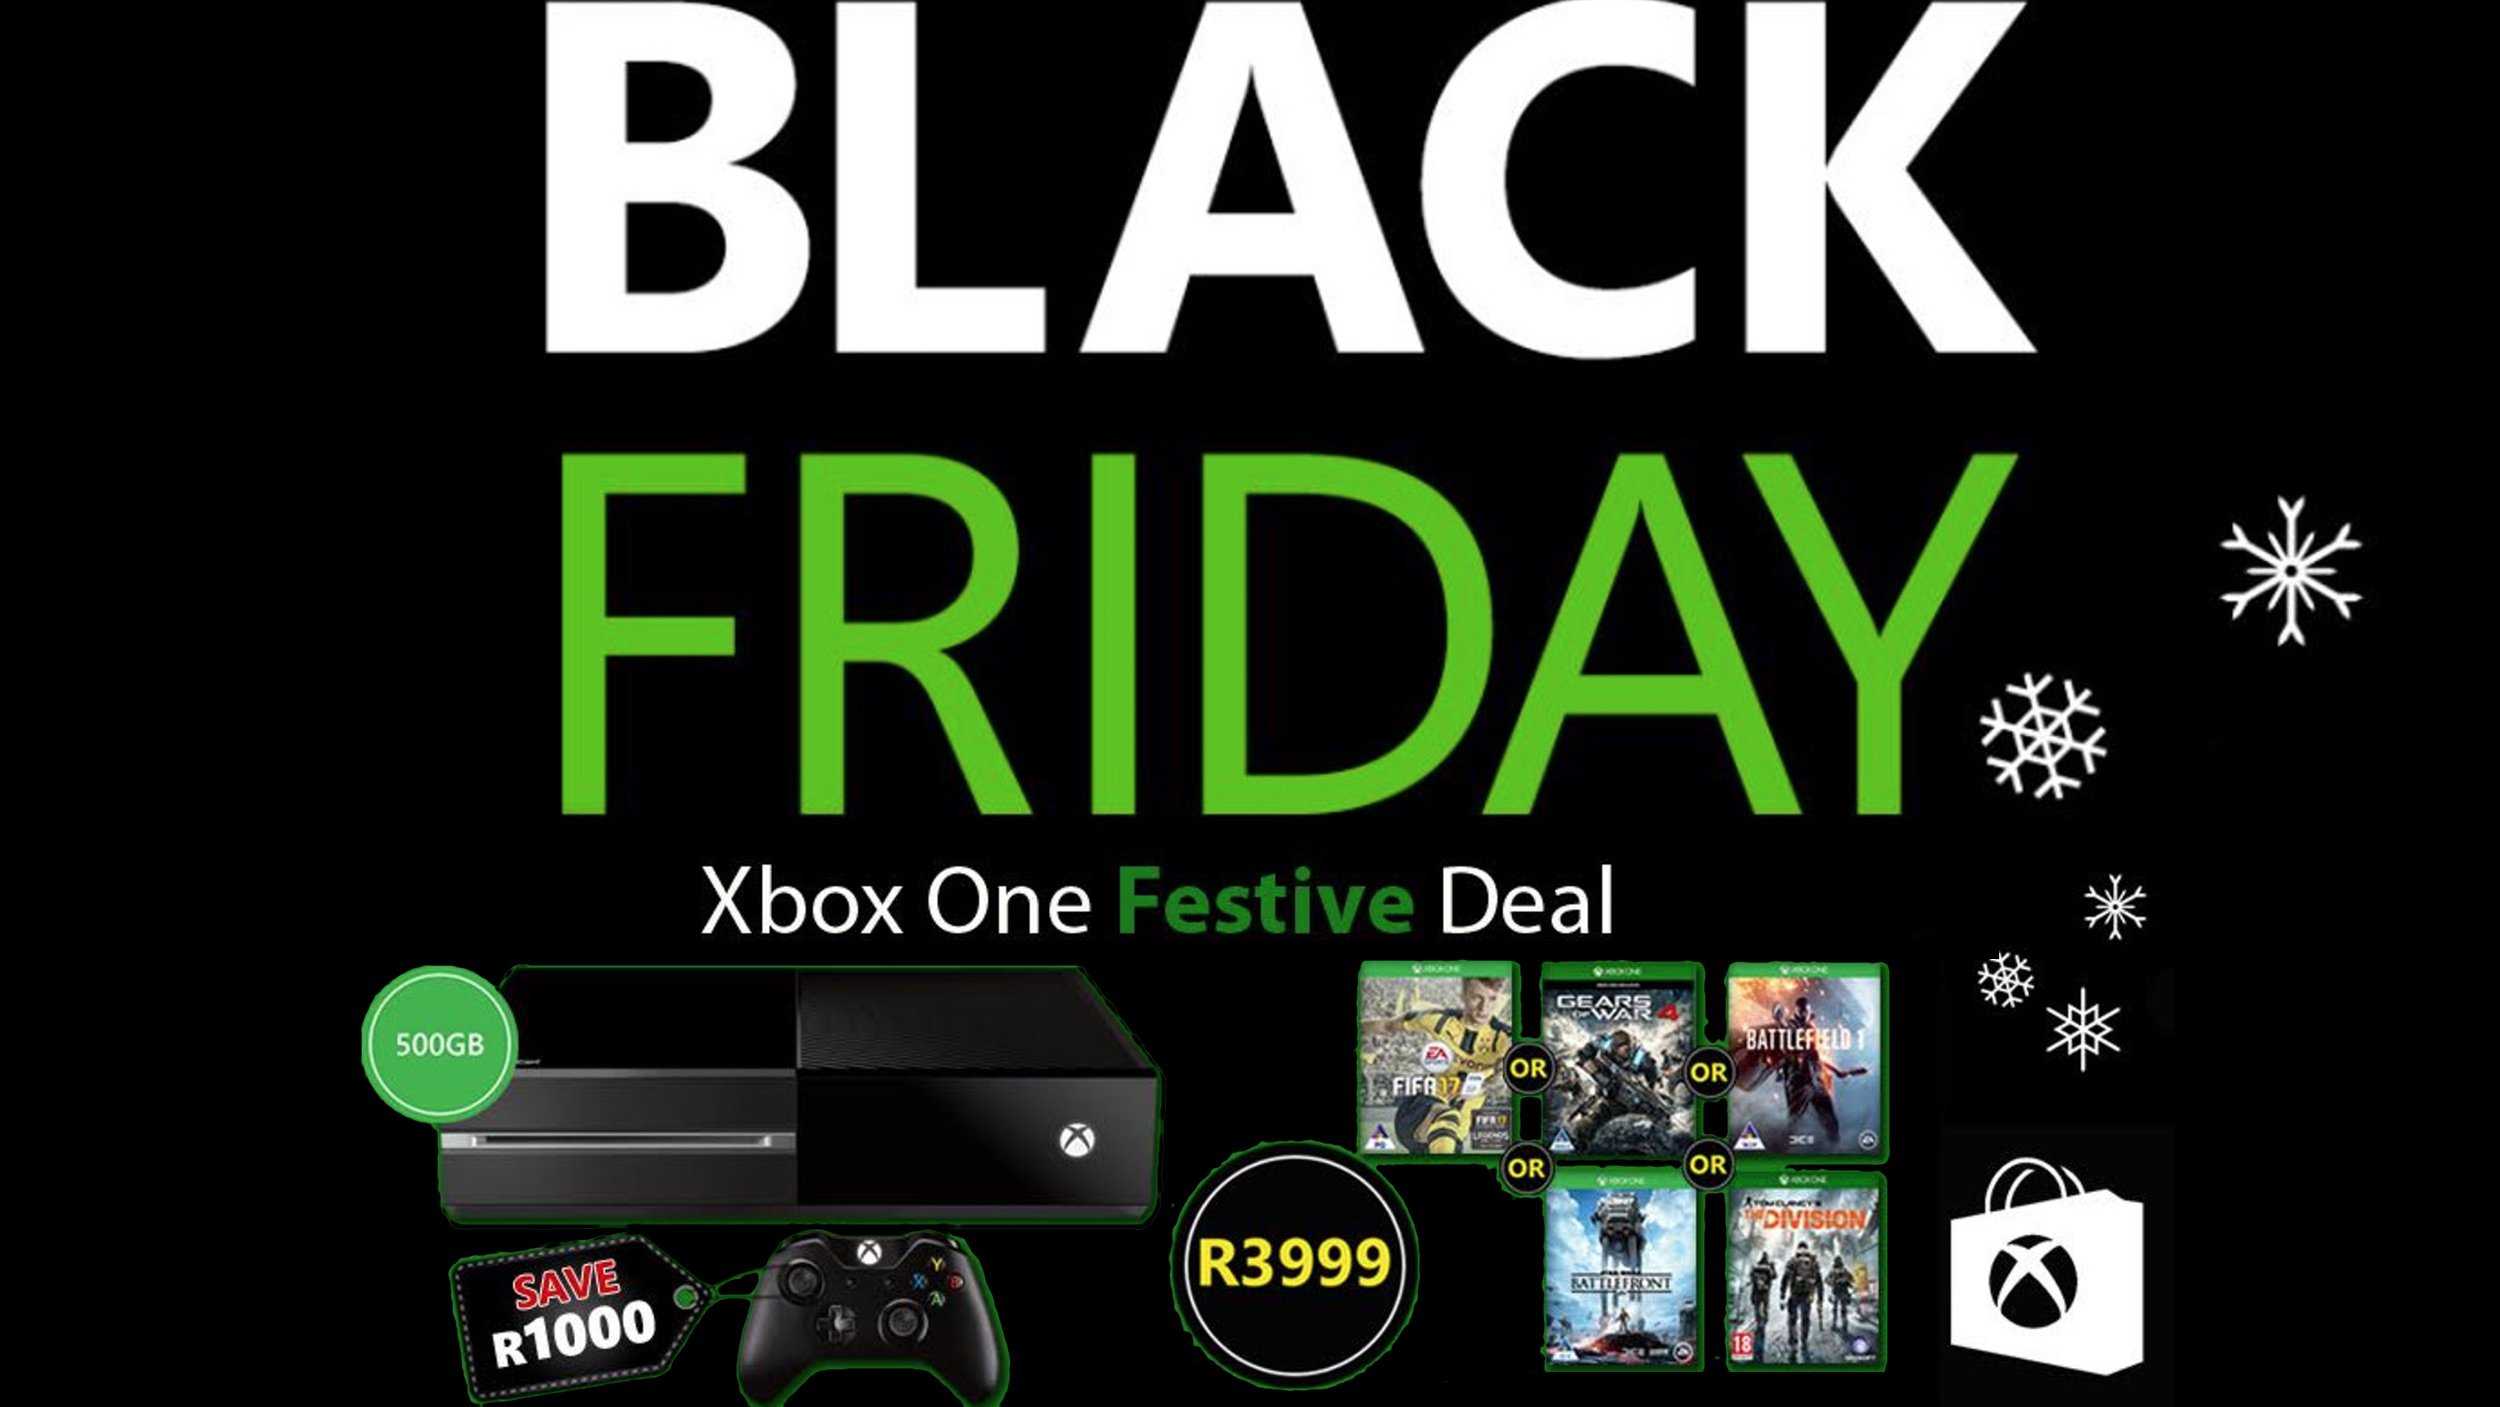 Black Friday 2019 Xbox One Deals South Africa - LOGOS - Will There Be Black Friday Deals On Xbox One